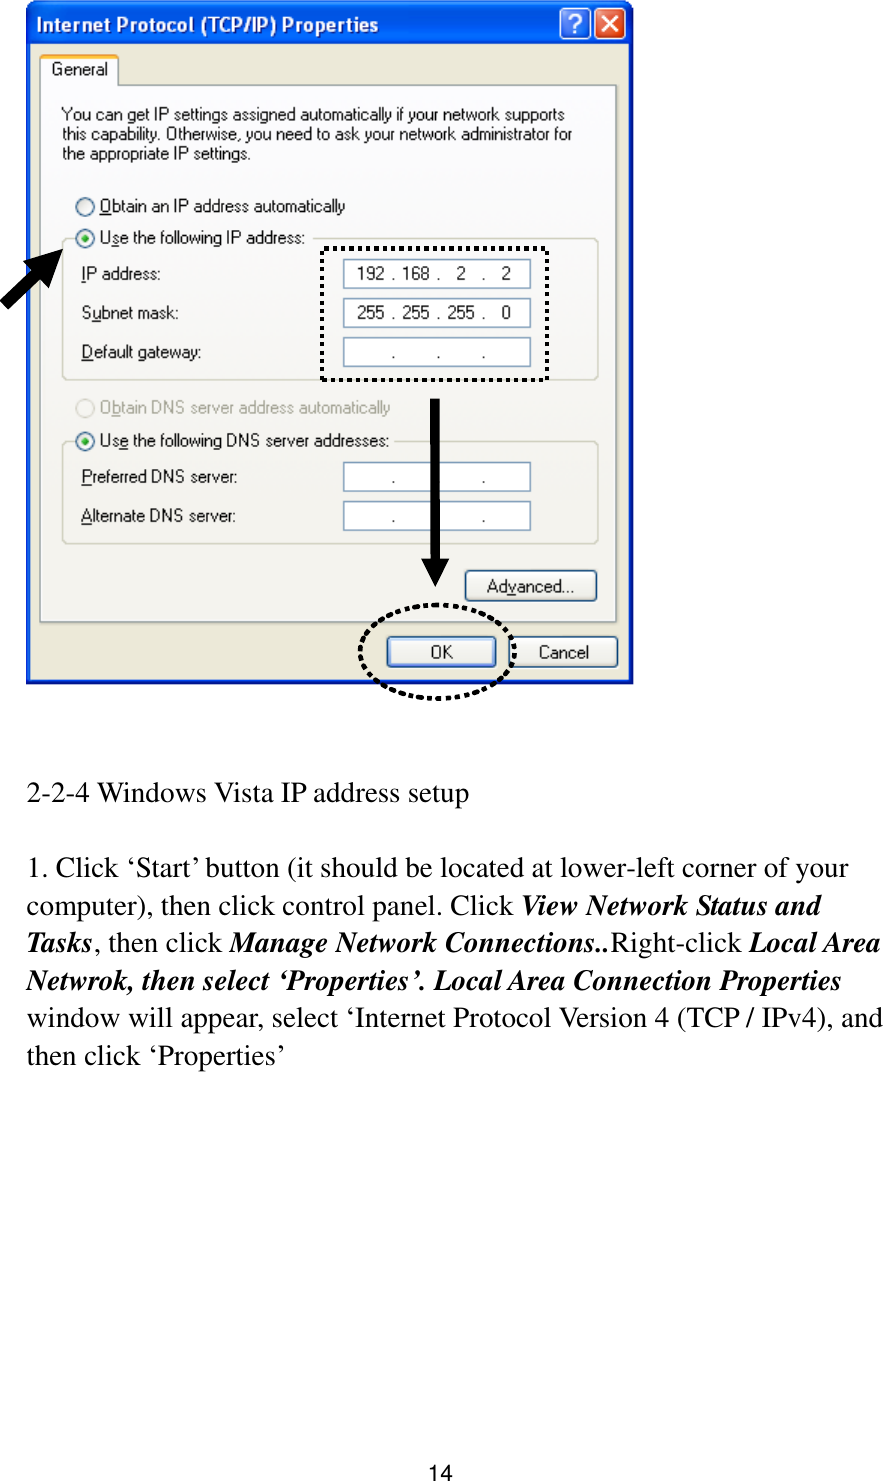 14    2-2-4 Windows Vista IP address setup  1. Click „Start‟ button (it should be located at lower-left corner of your computer), then click control panel. Click View Network Status and Tasks, then click Manage Network Connections..Right-click Local Area Netwrok, then select ‘Properties’. Local Area Connection Properties window will appear, select „Internet Protocol Version 4 (TCP / IPv4), and then click „Properties‟  